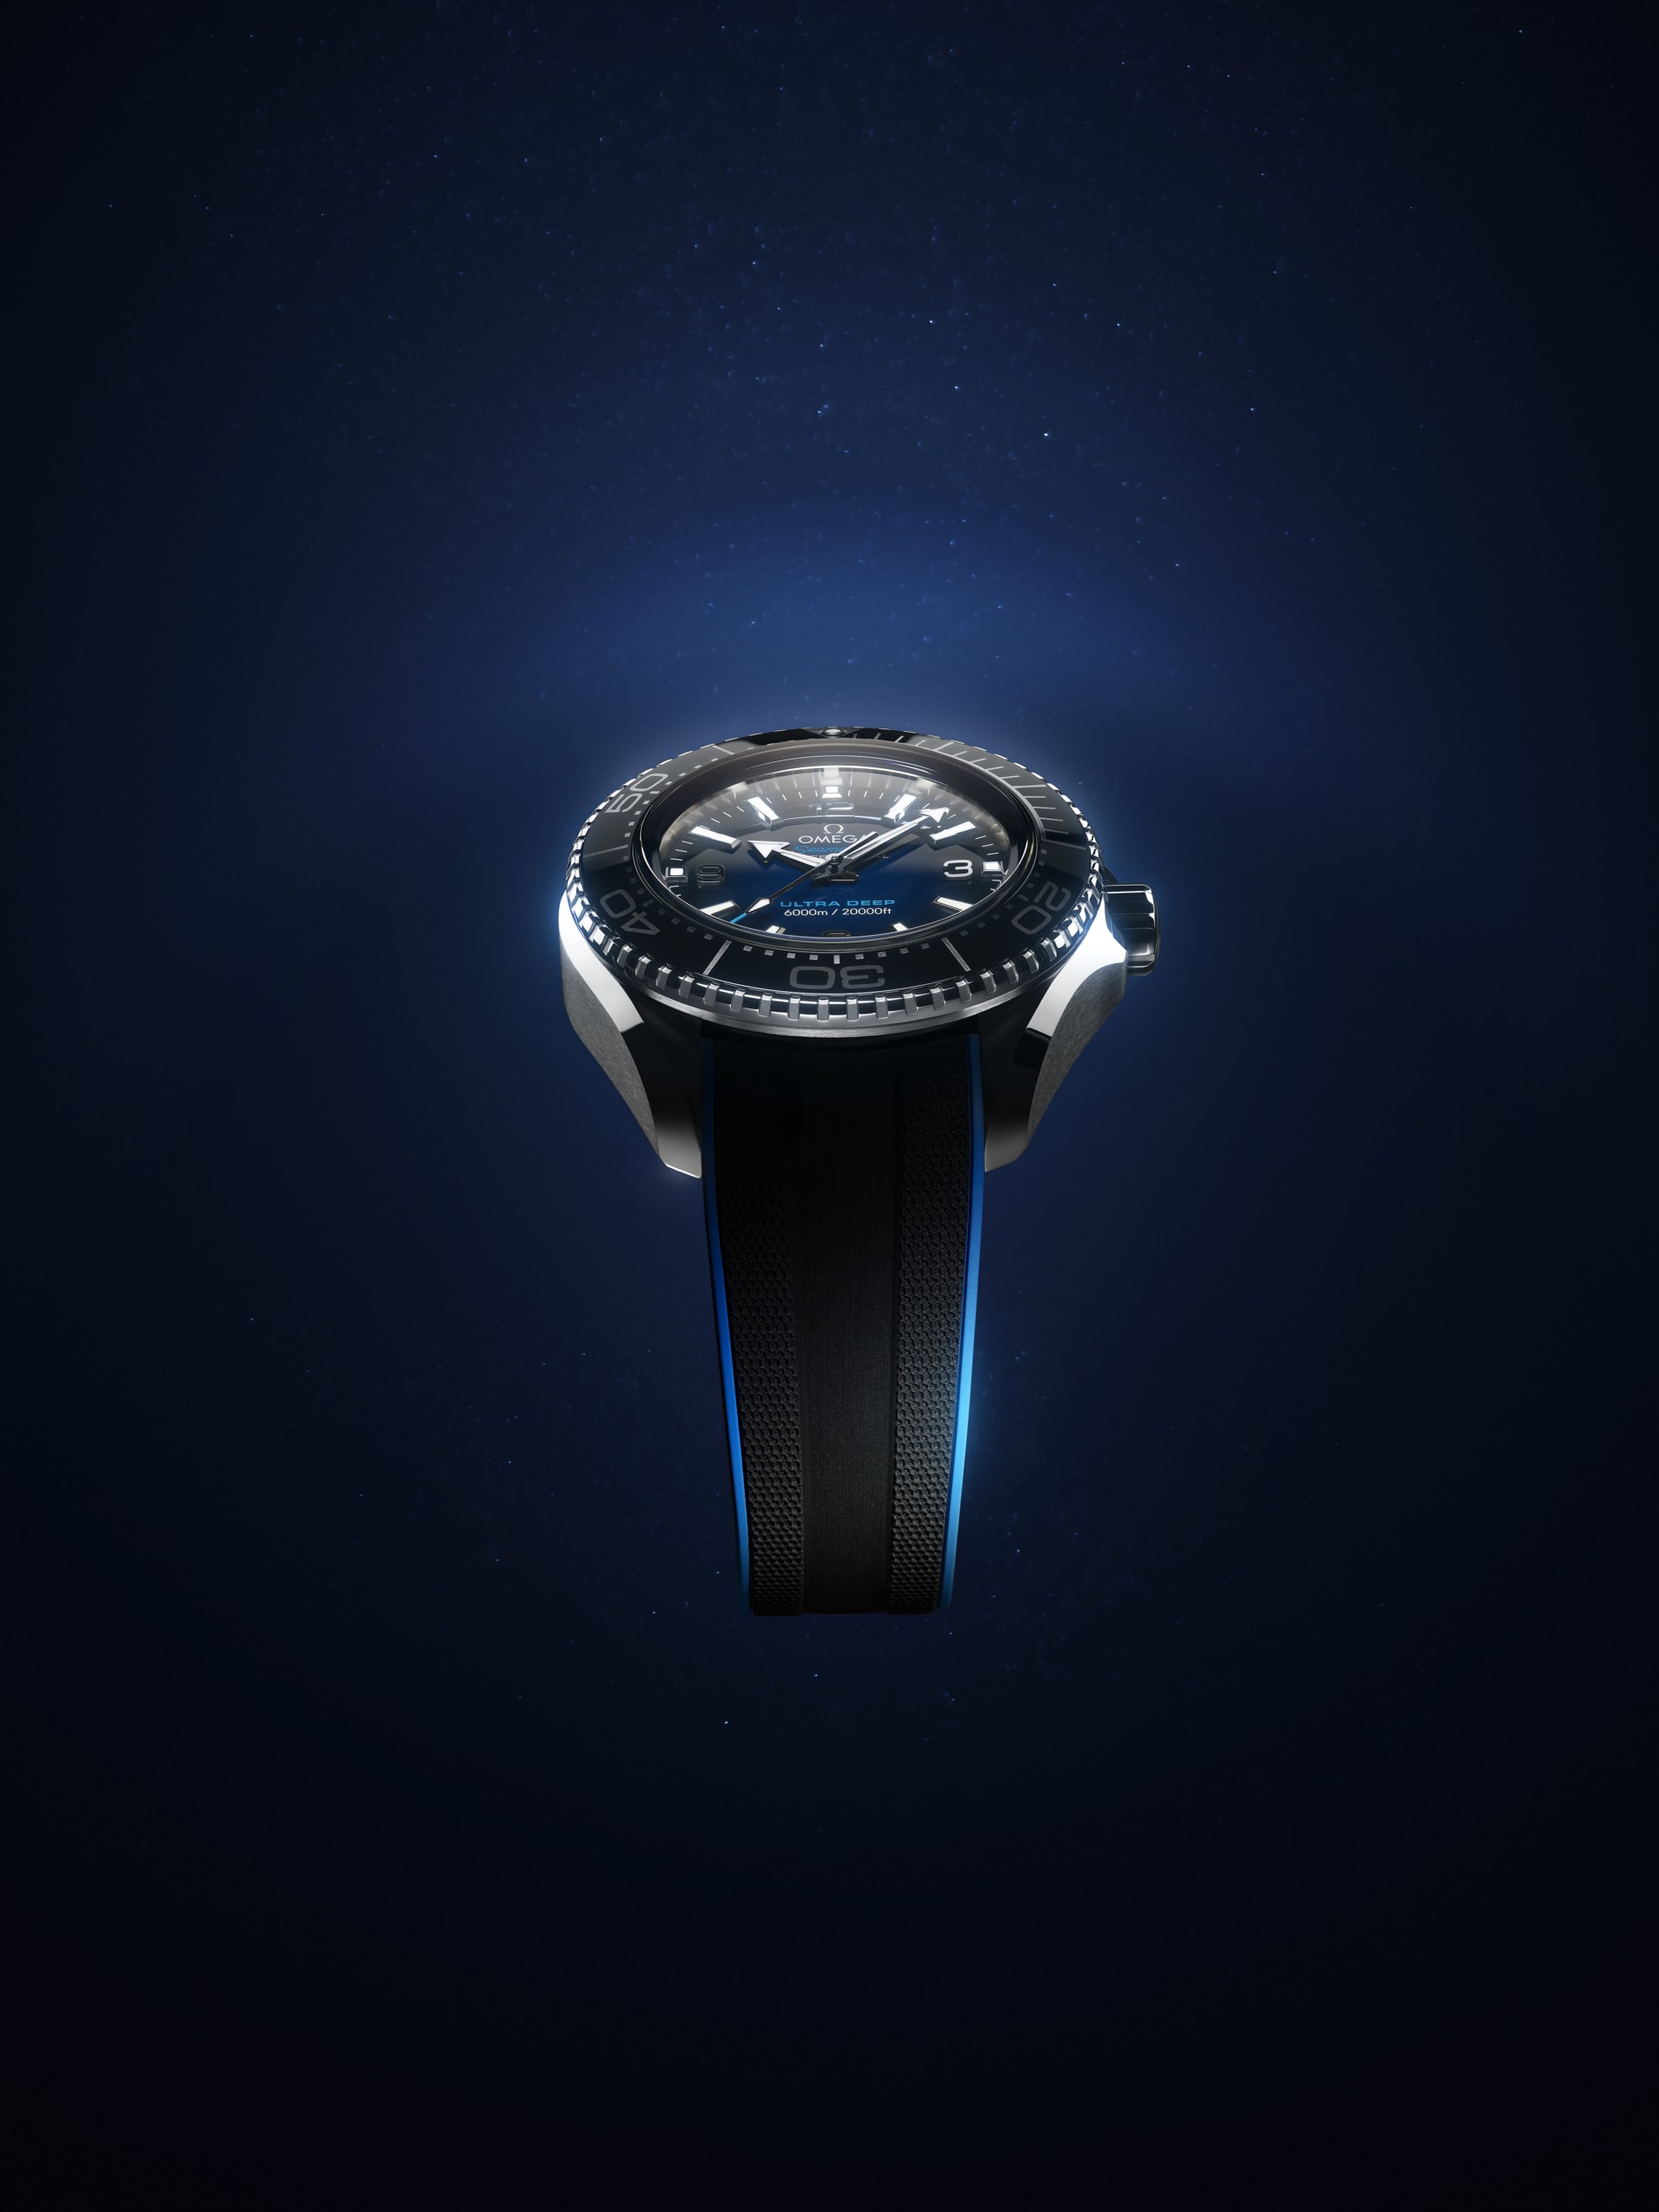 Omega's new Seamaster Planet Ocean Ultra Deep OMEGA_215.32.46.21.03.001-scaled